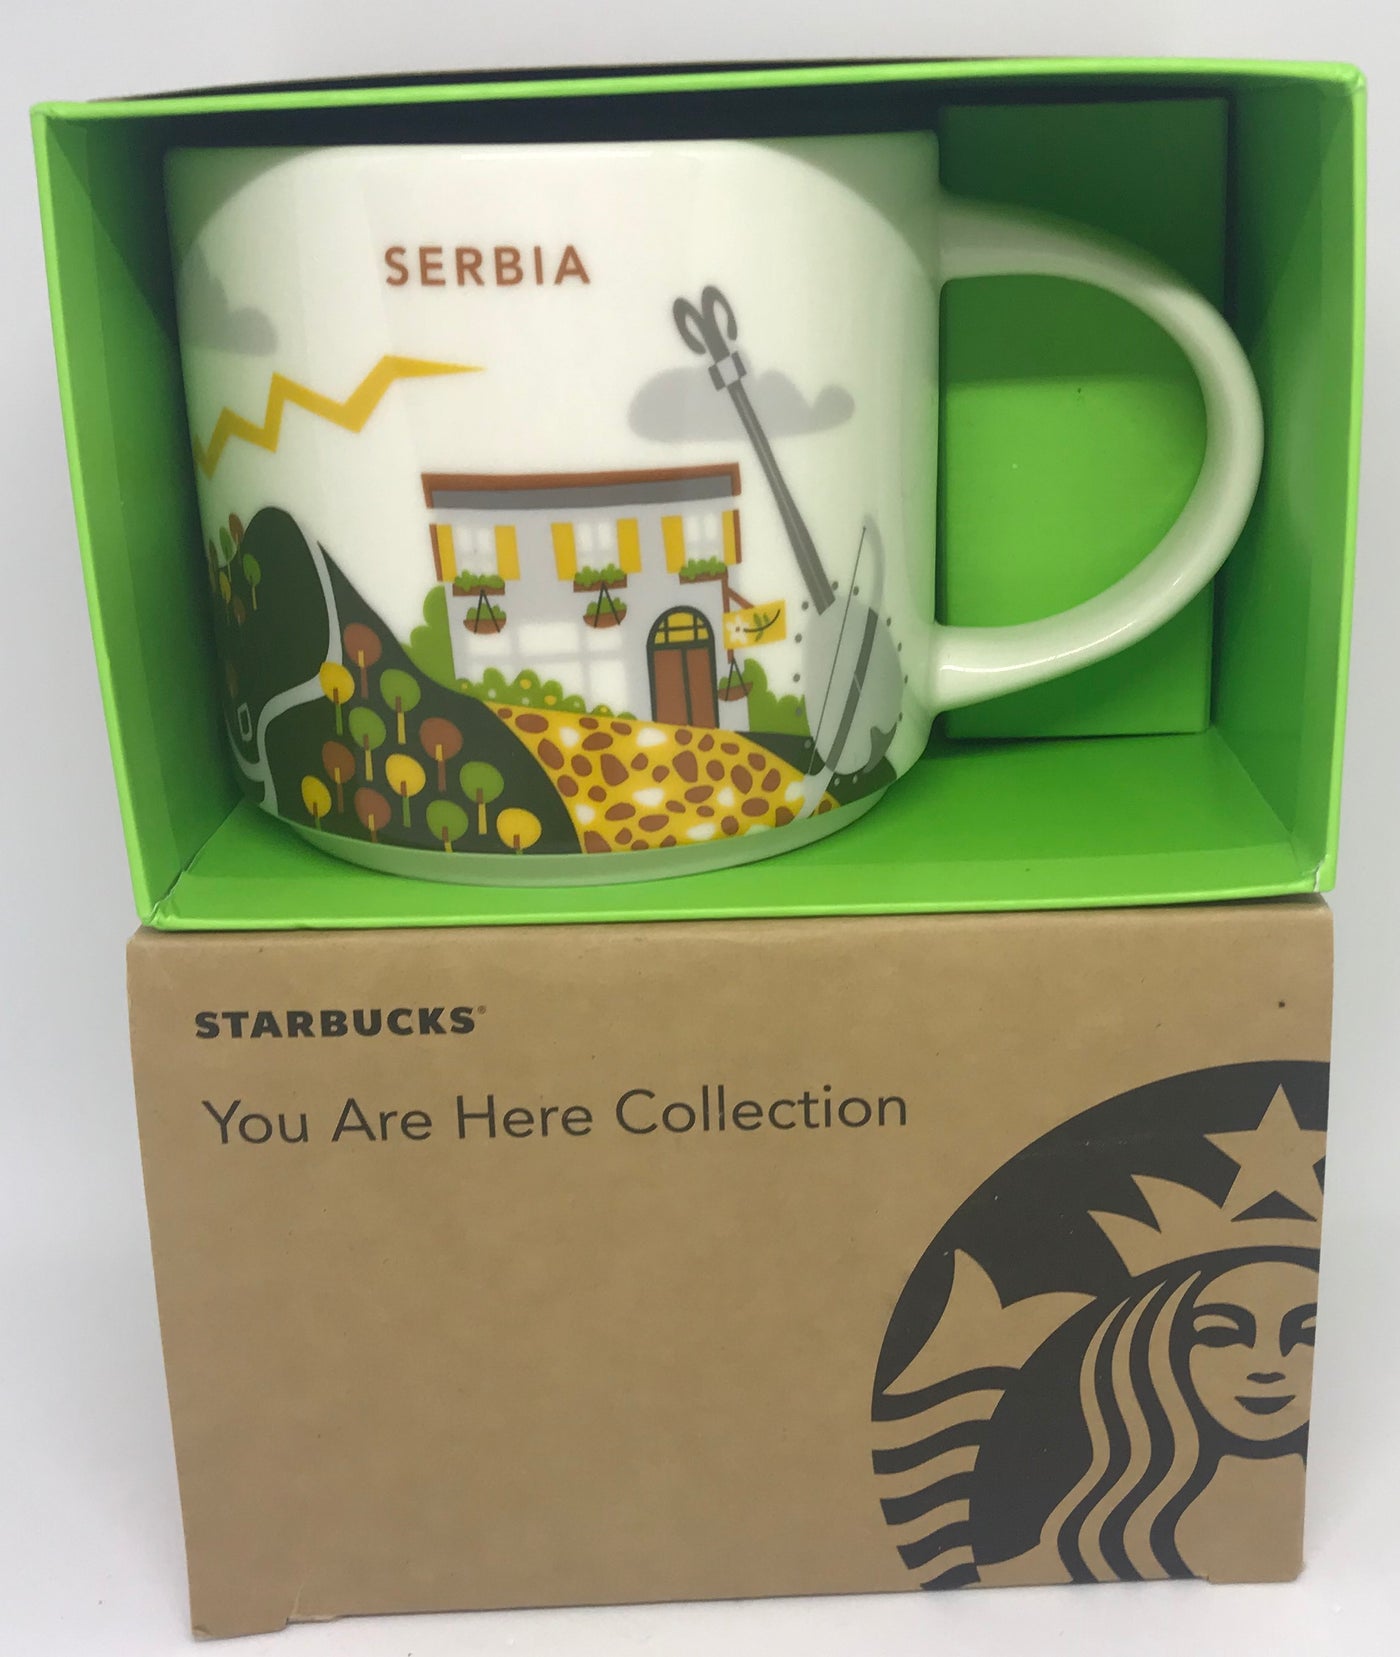 Starbucks You Are Here Collection Serbia Ceramic Coffee Mug New With Box